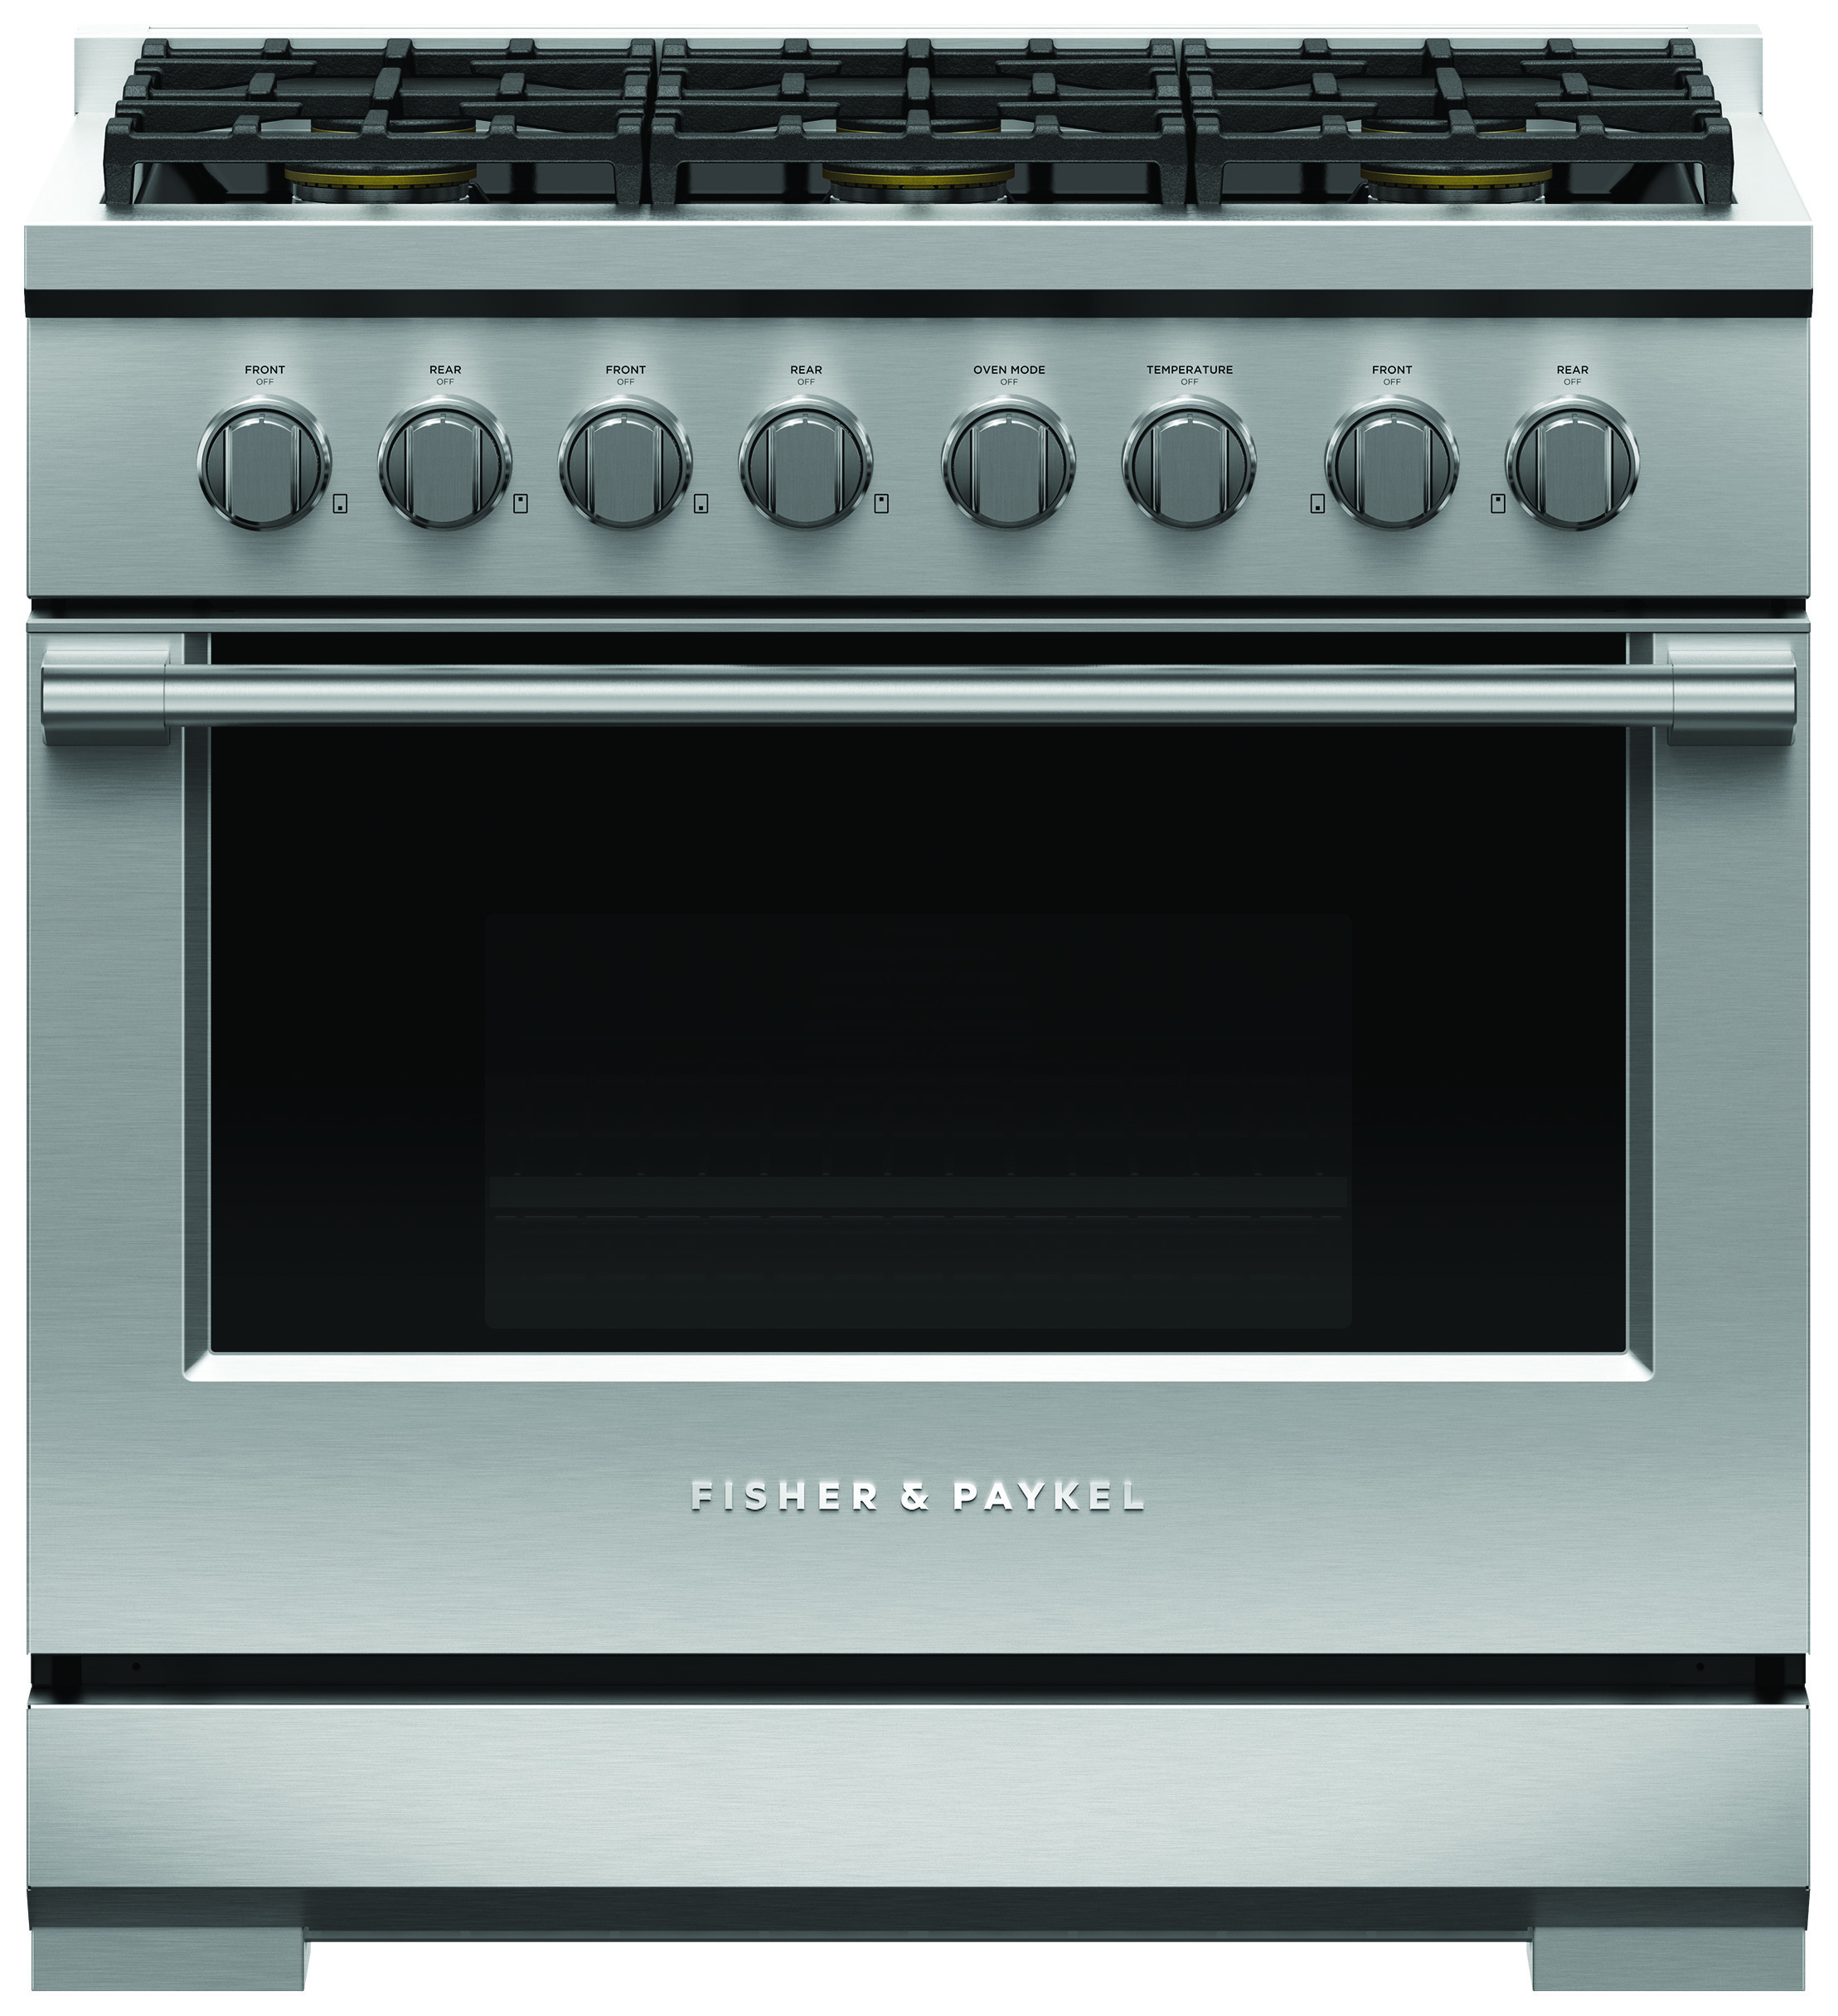  Fisher&Paykel RGV3-366-L